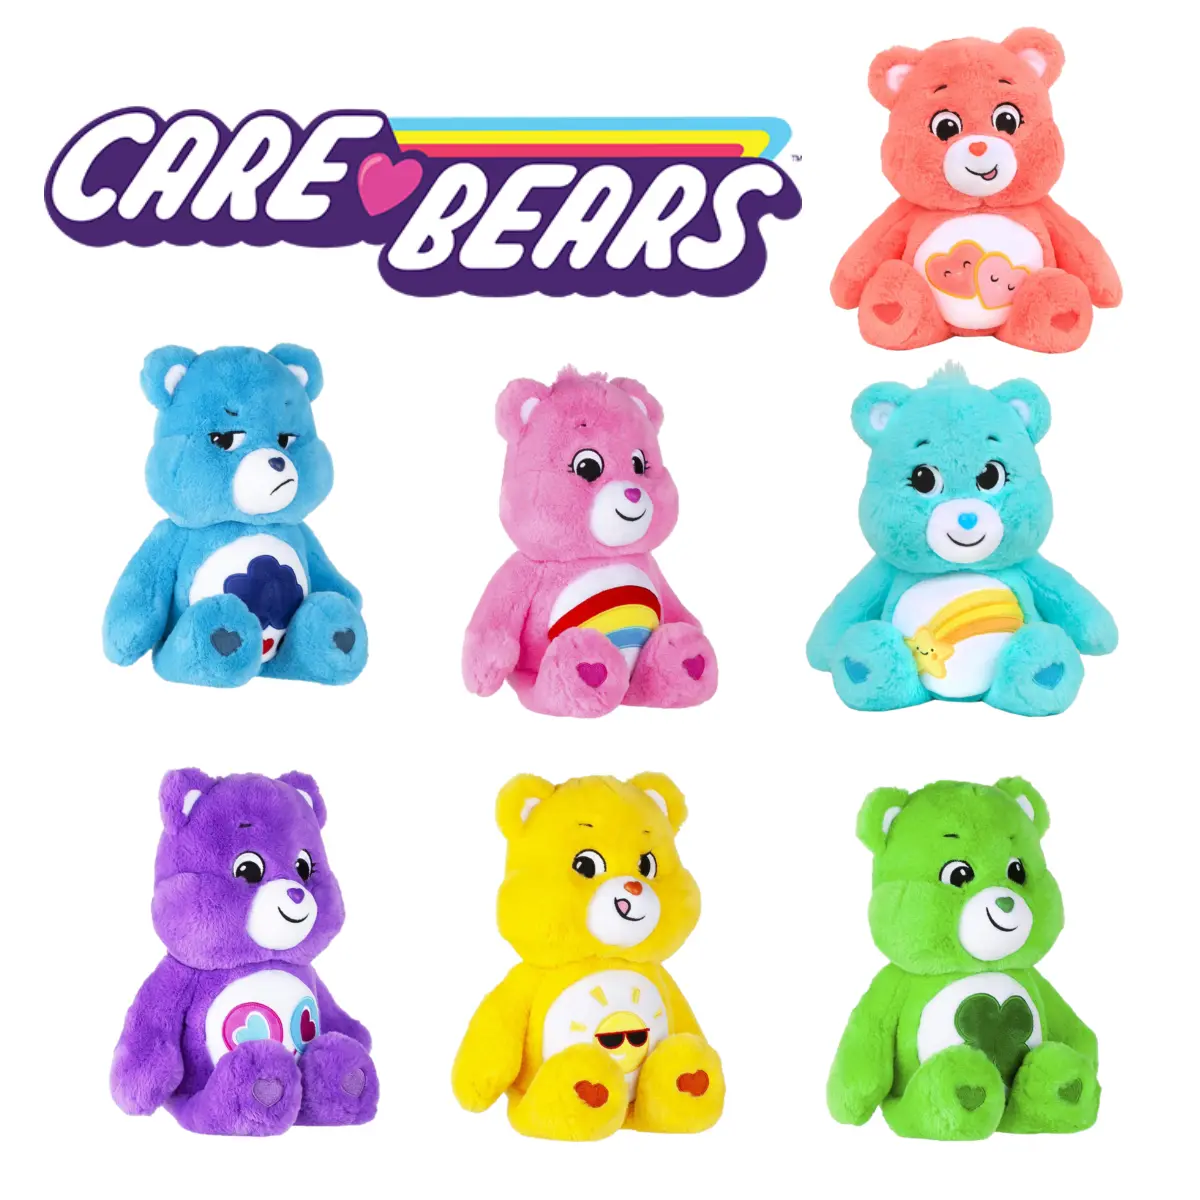 Care Bears 14 Collectible Soft Plush Toys Official Brand New